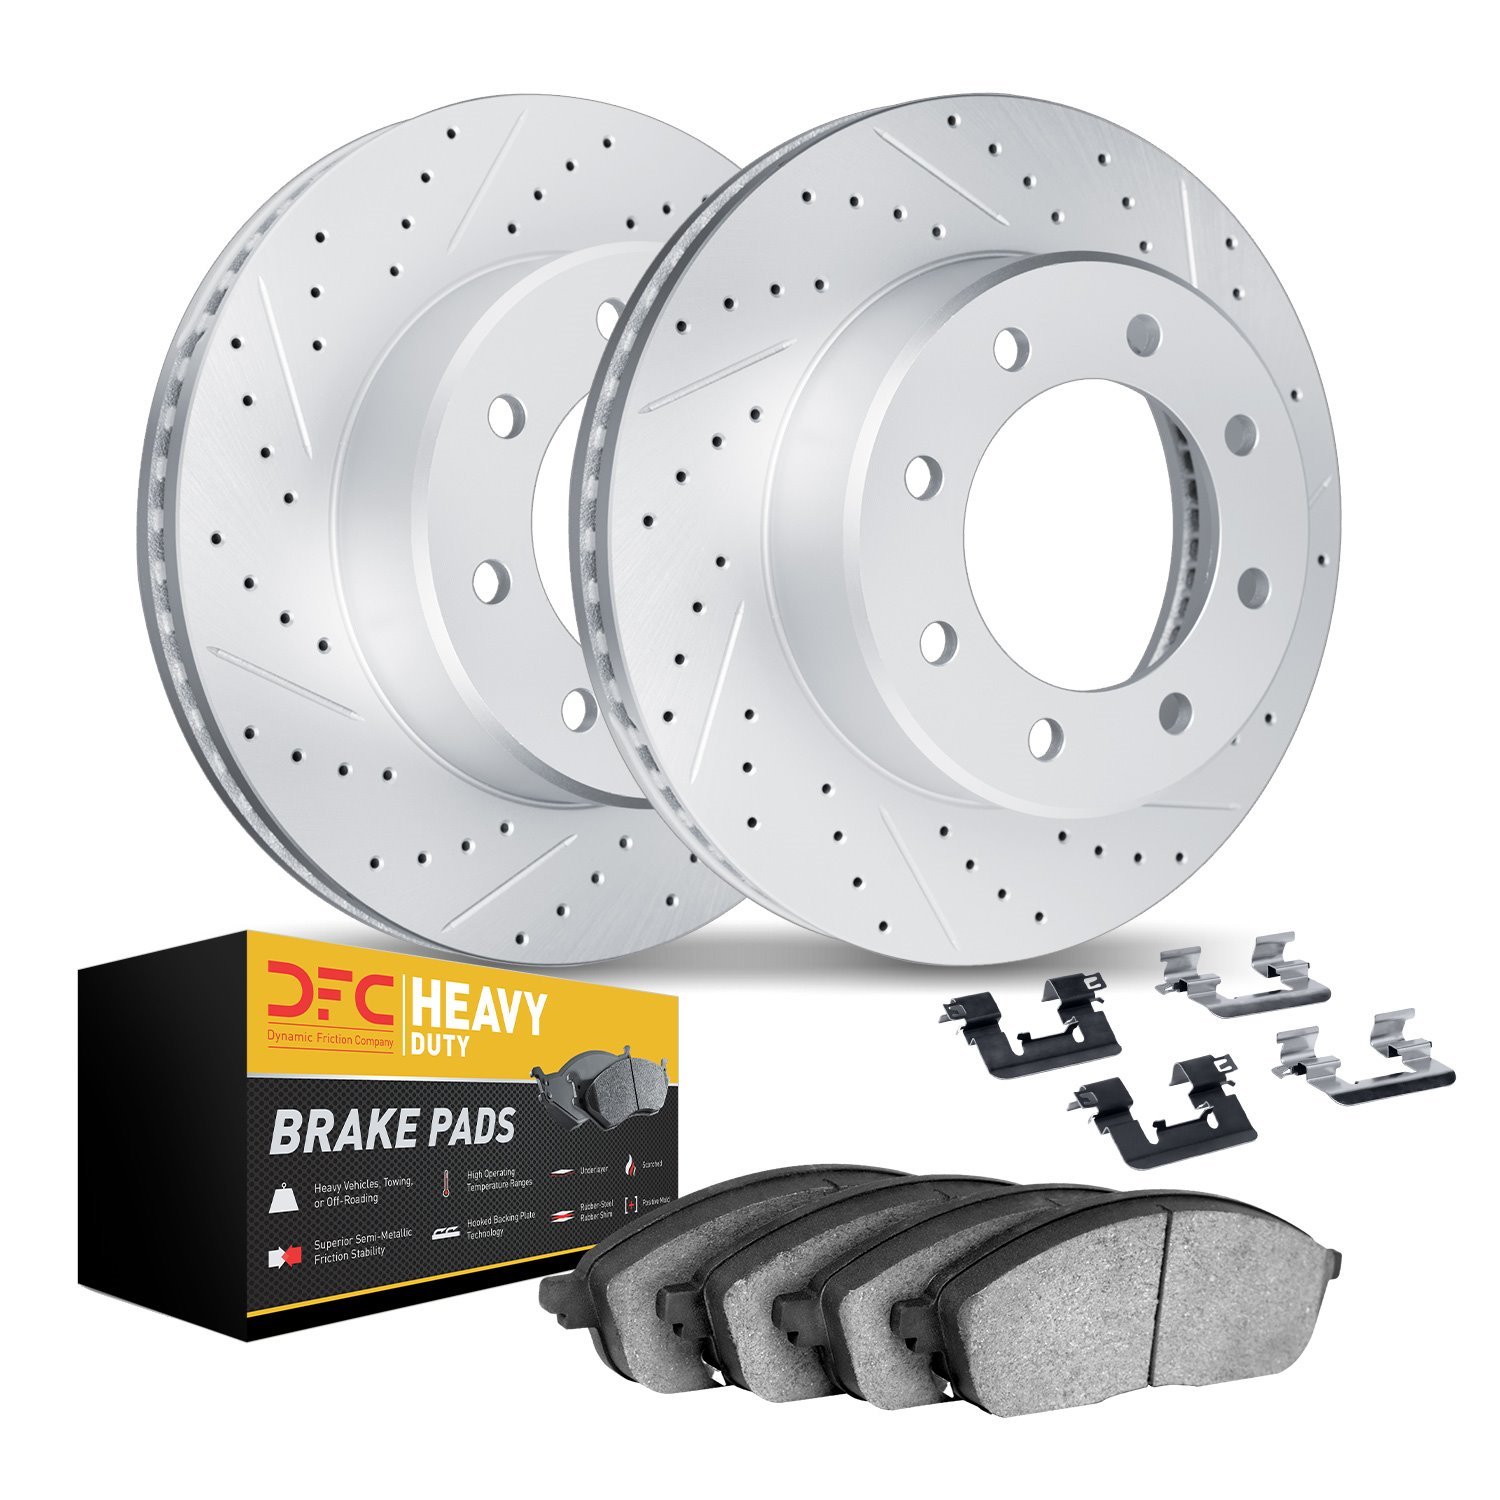 2212-99143 Geoperformance Drilled/Slotted Rotors w/Heavy-Duty Pads Kit & Hardware, 2003-2005 Ford/Lincoln/Mercury/Mazda, Positio